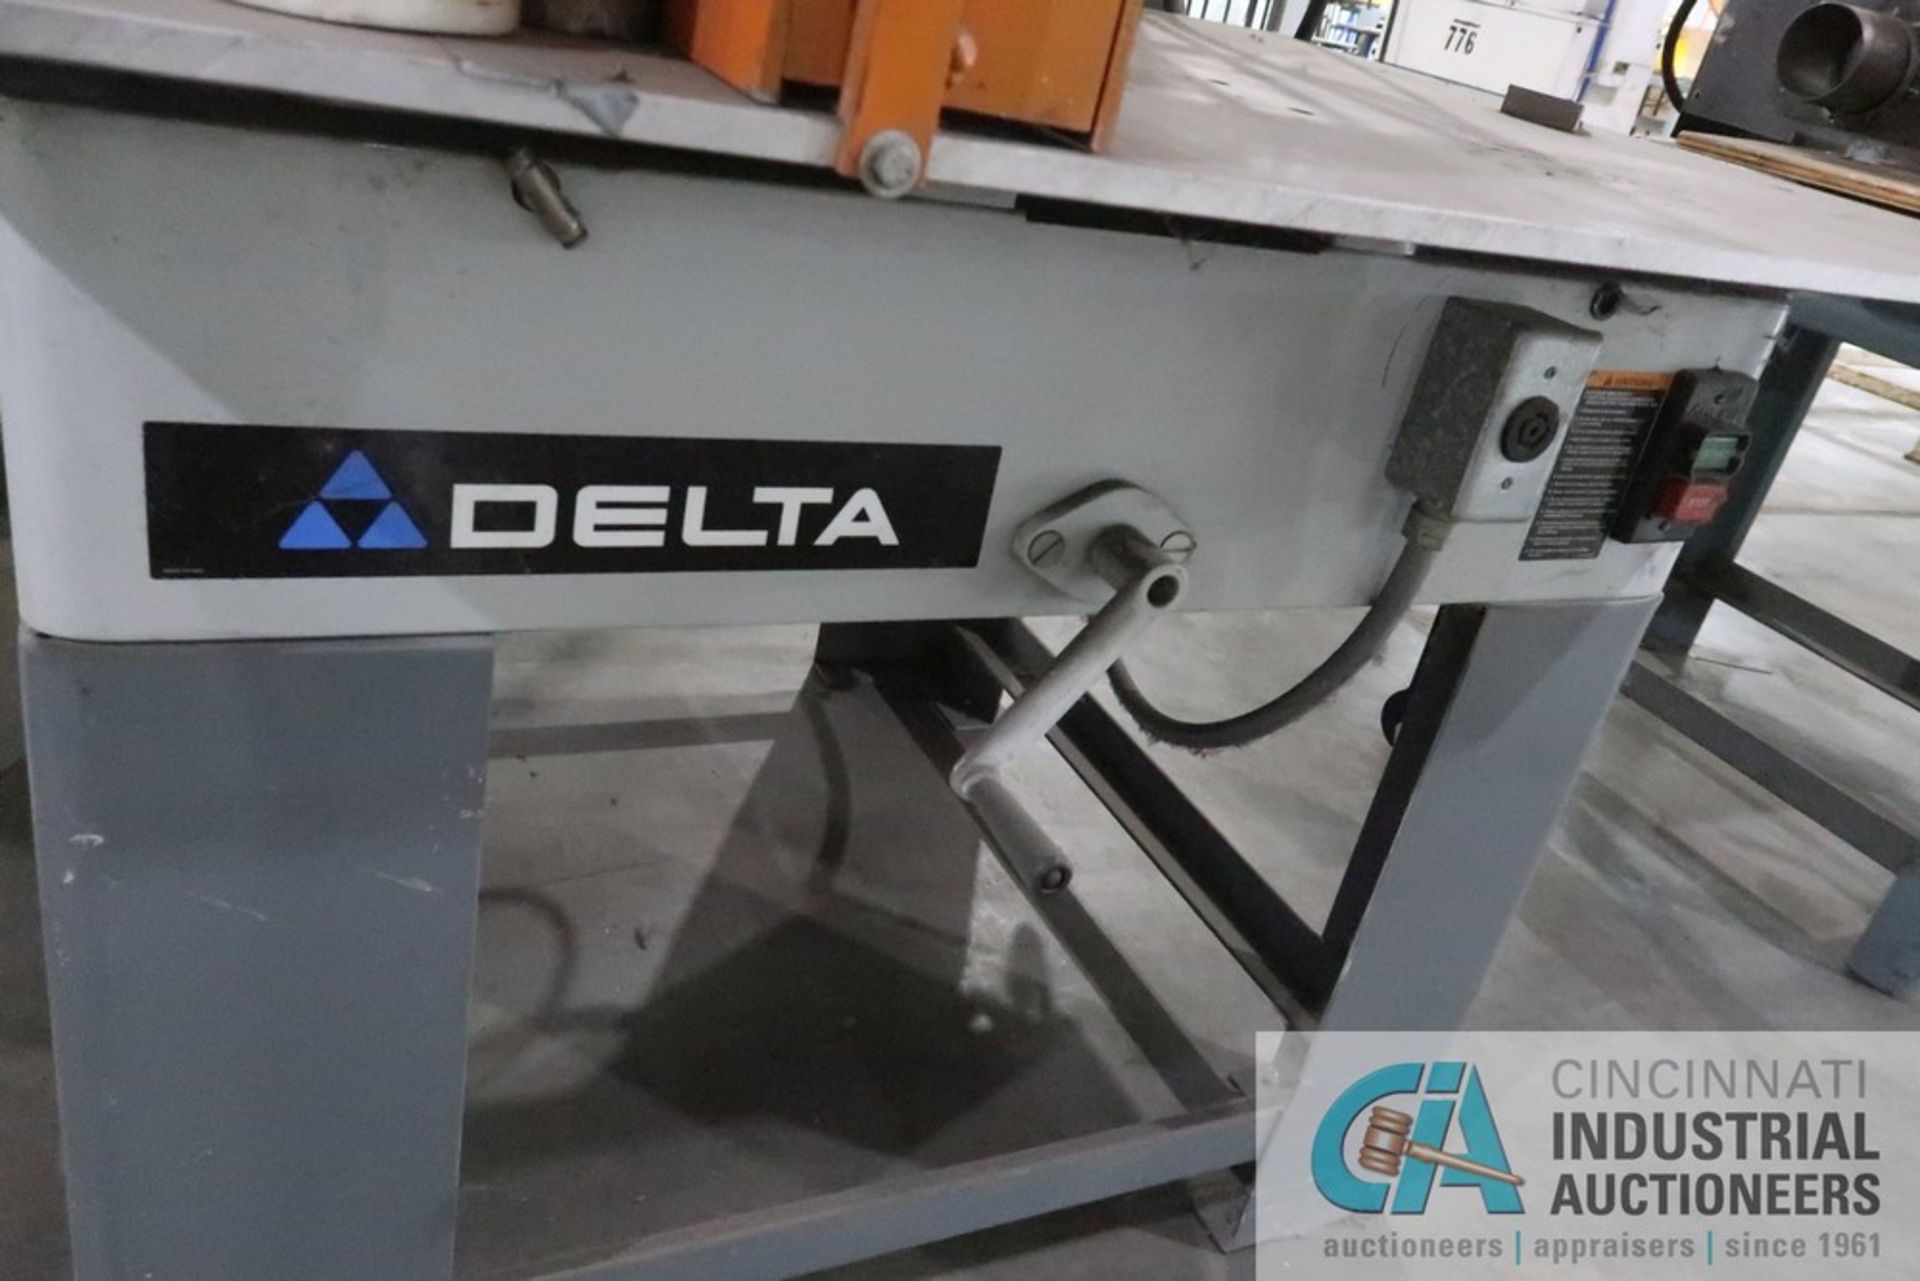 12" DELTA RADIAL ARM SAW - Image 5 of 5